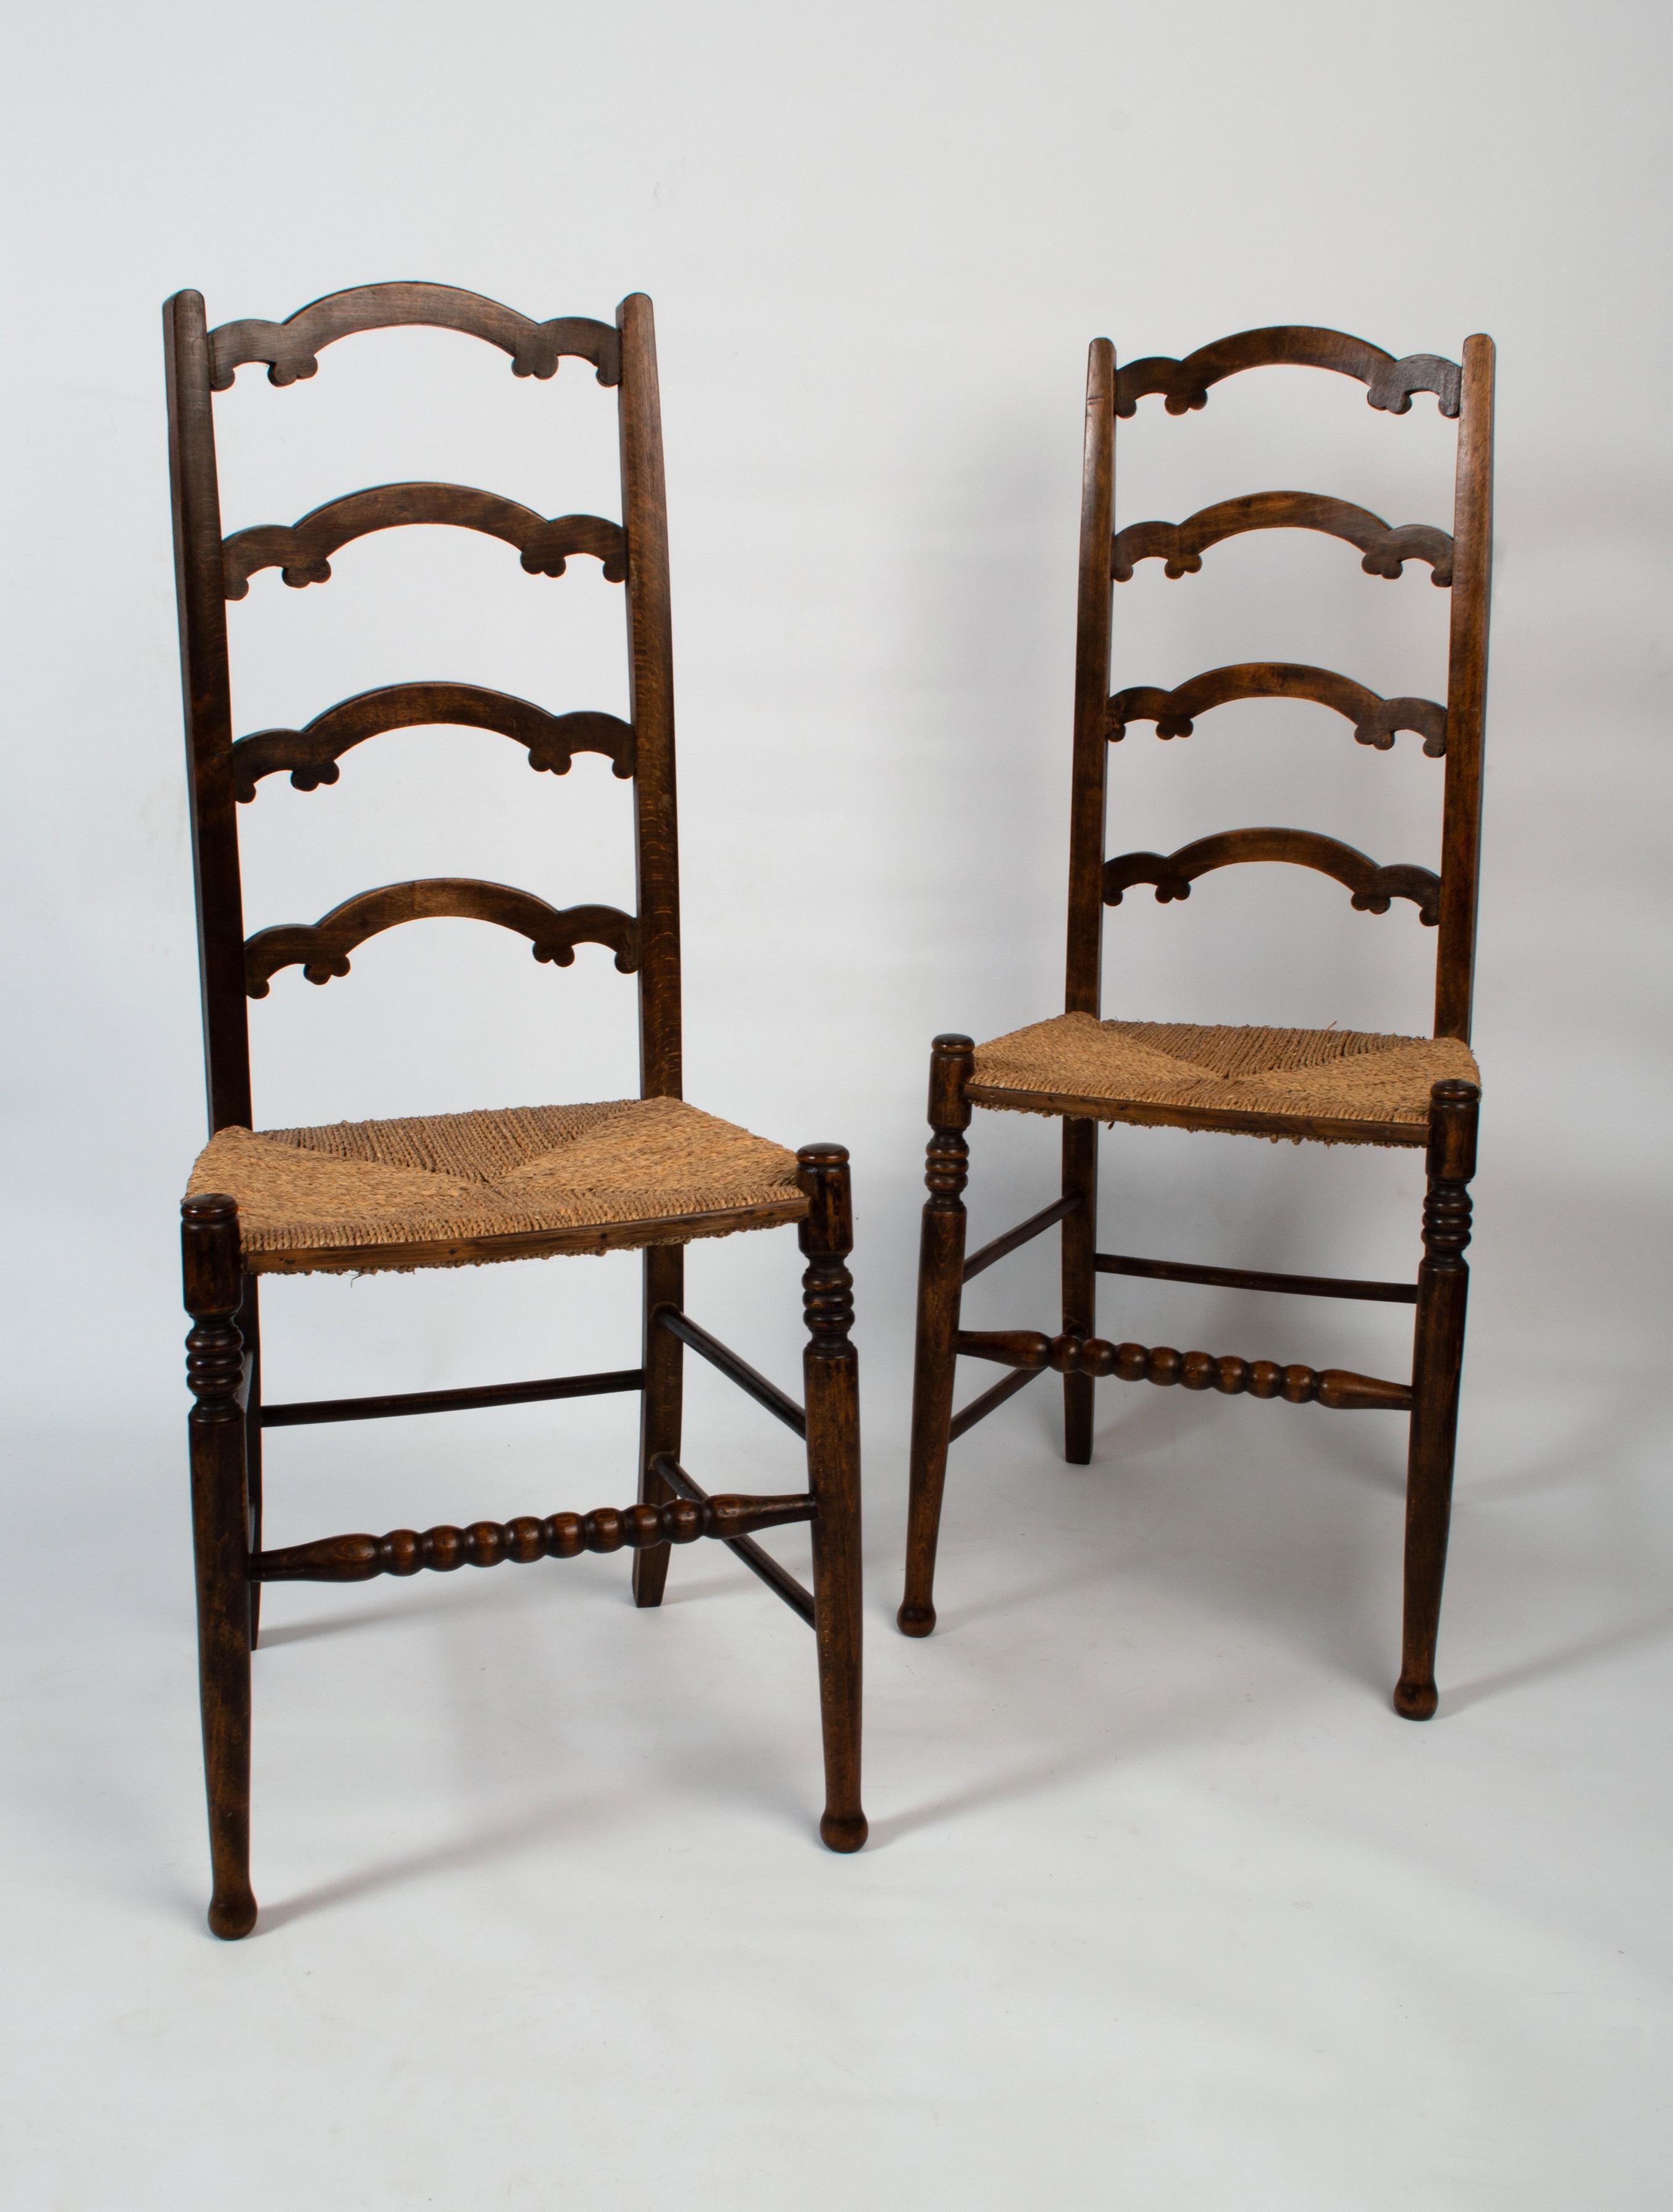 Pair Antique English Arts & Crafts Liberty & Co. Rush chairs attributed to William Birch.
circa 1890
Very good condition commensurate of age. Good solid construction.